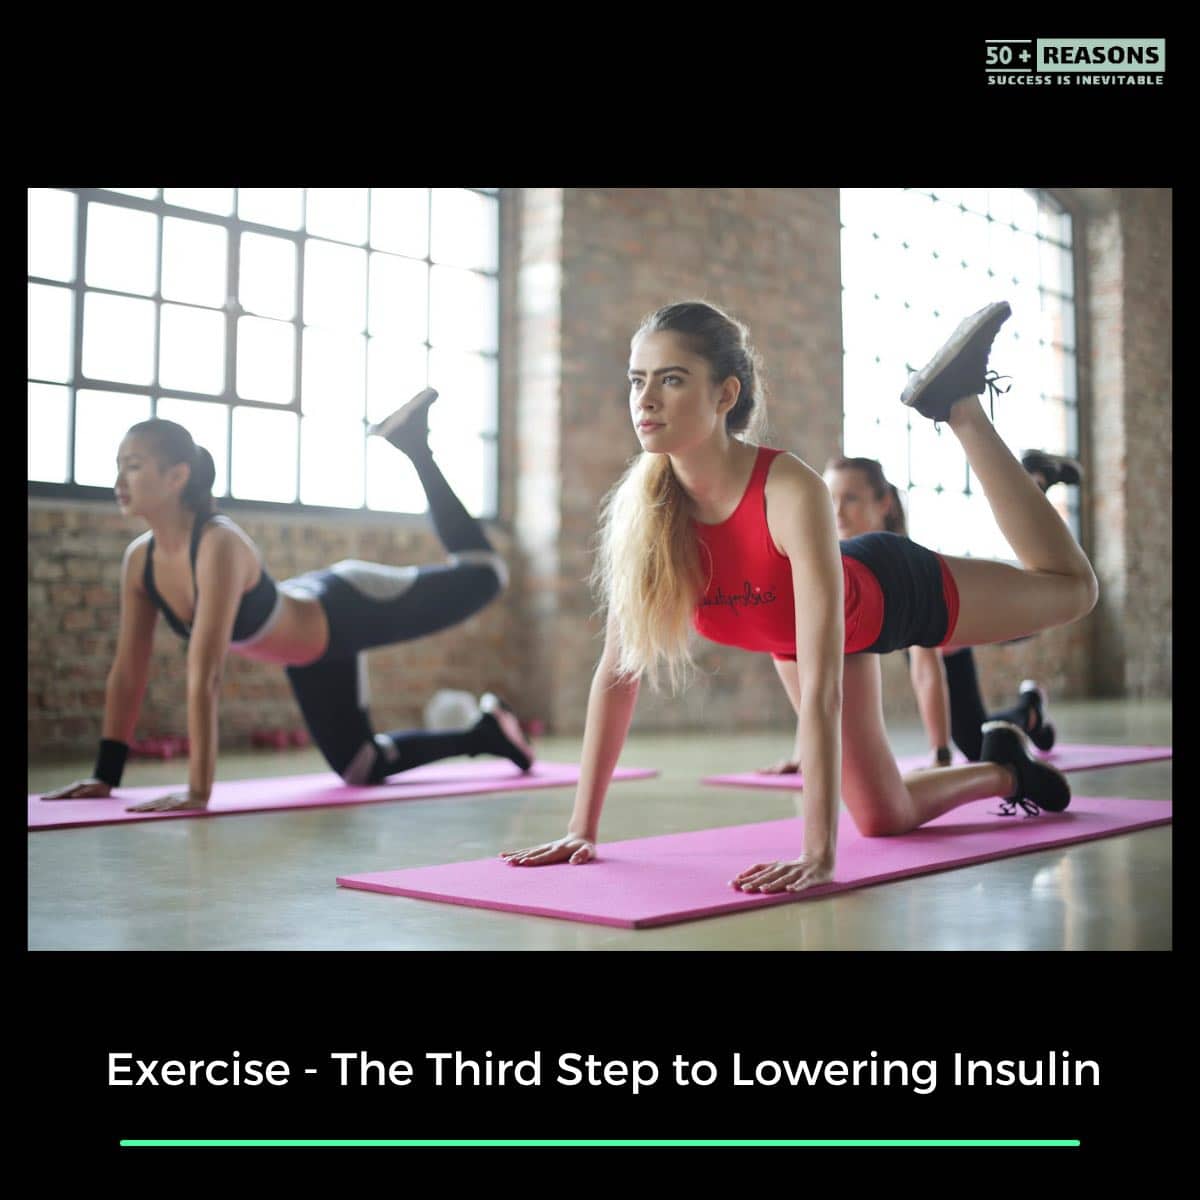 Exercise - The Third Step to Lowering Insulin